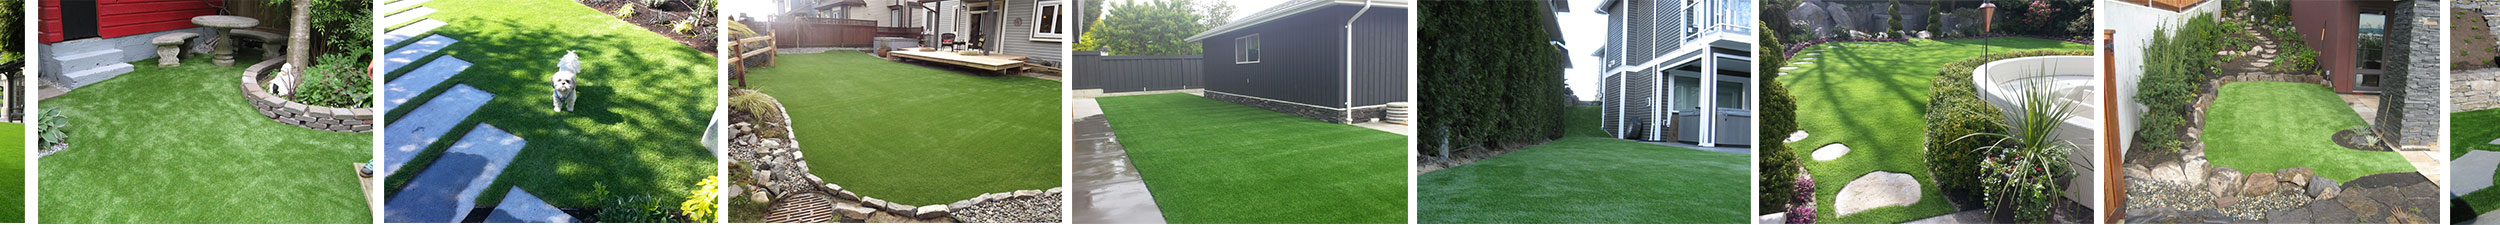 examples of artifiicial grass in residential backyards